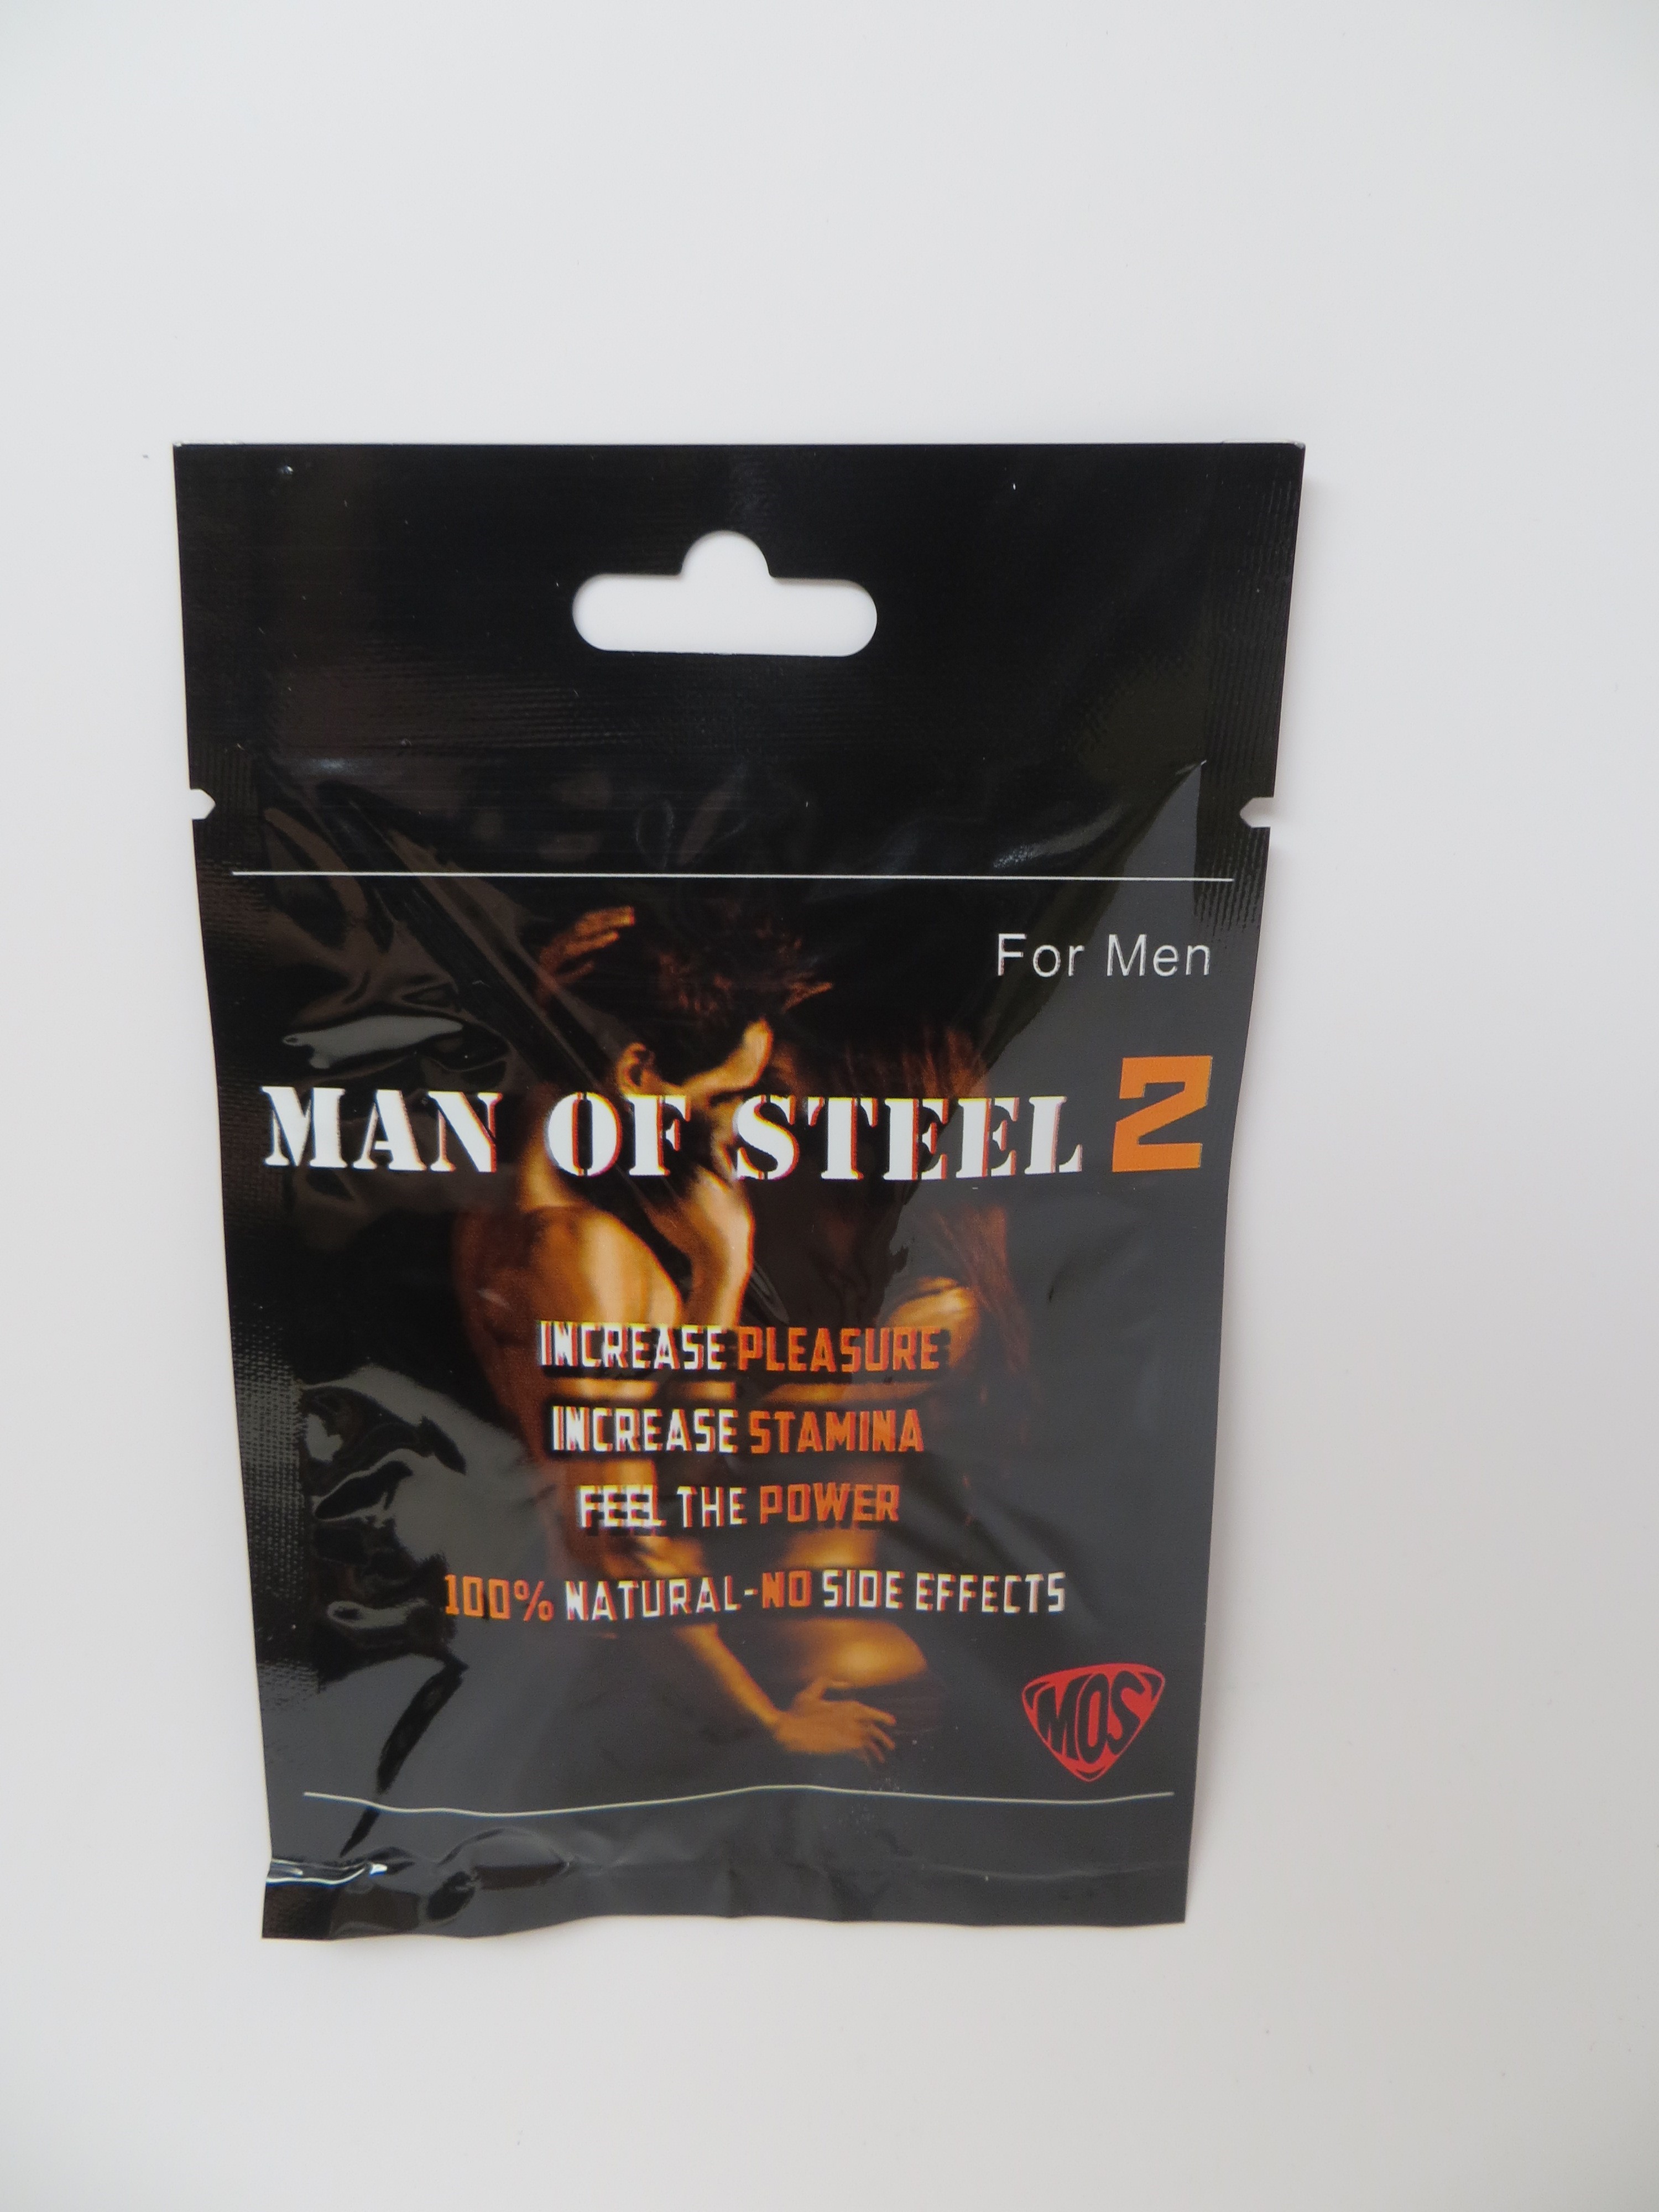 Image of the illigal product: Man of Steel 2